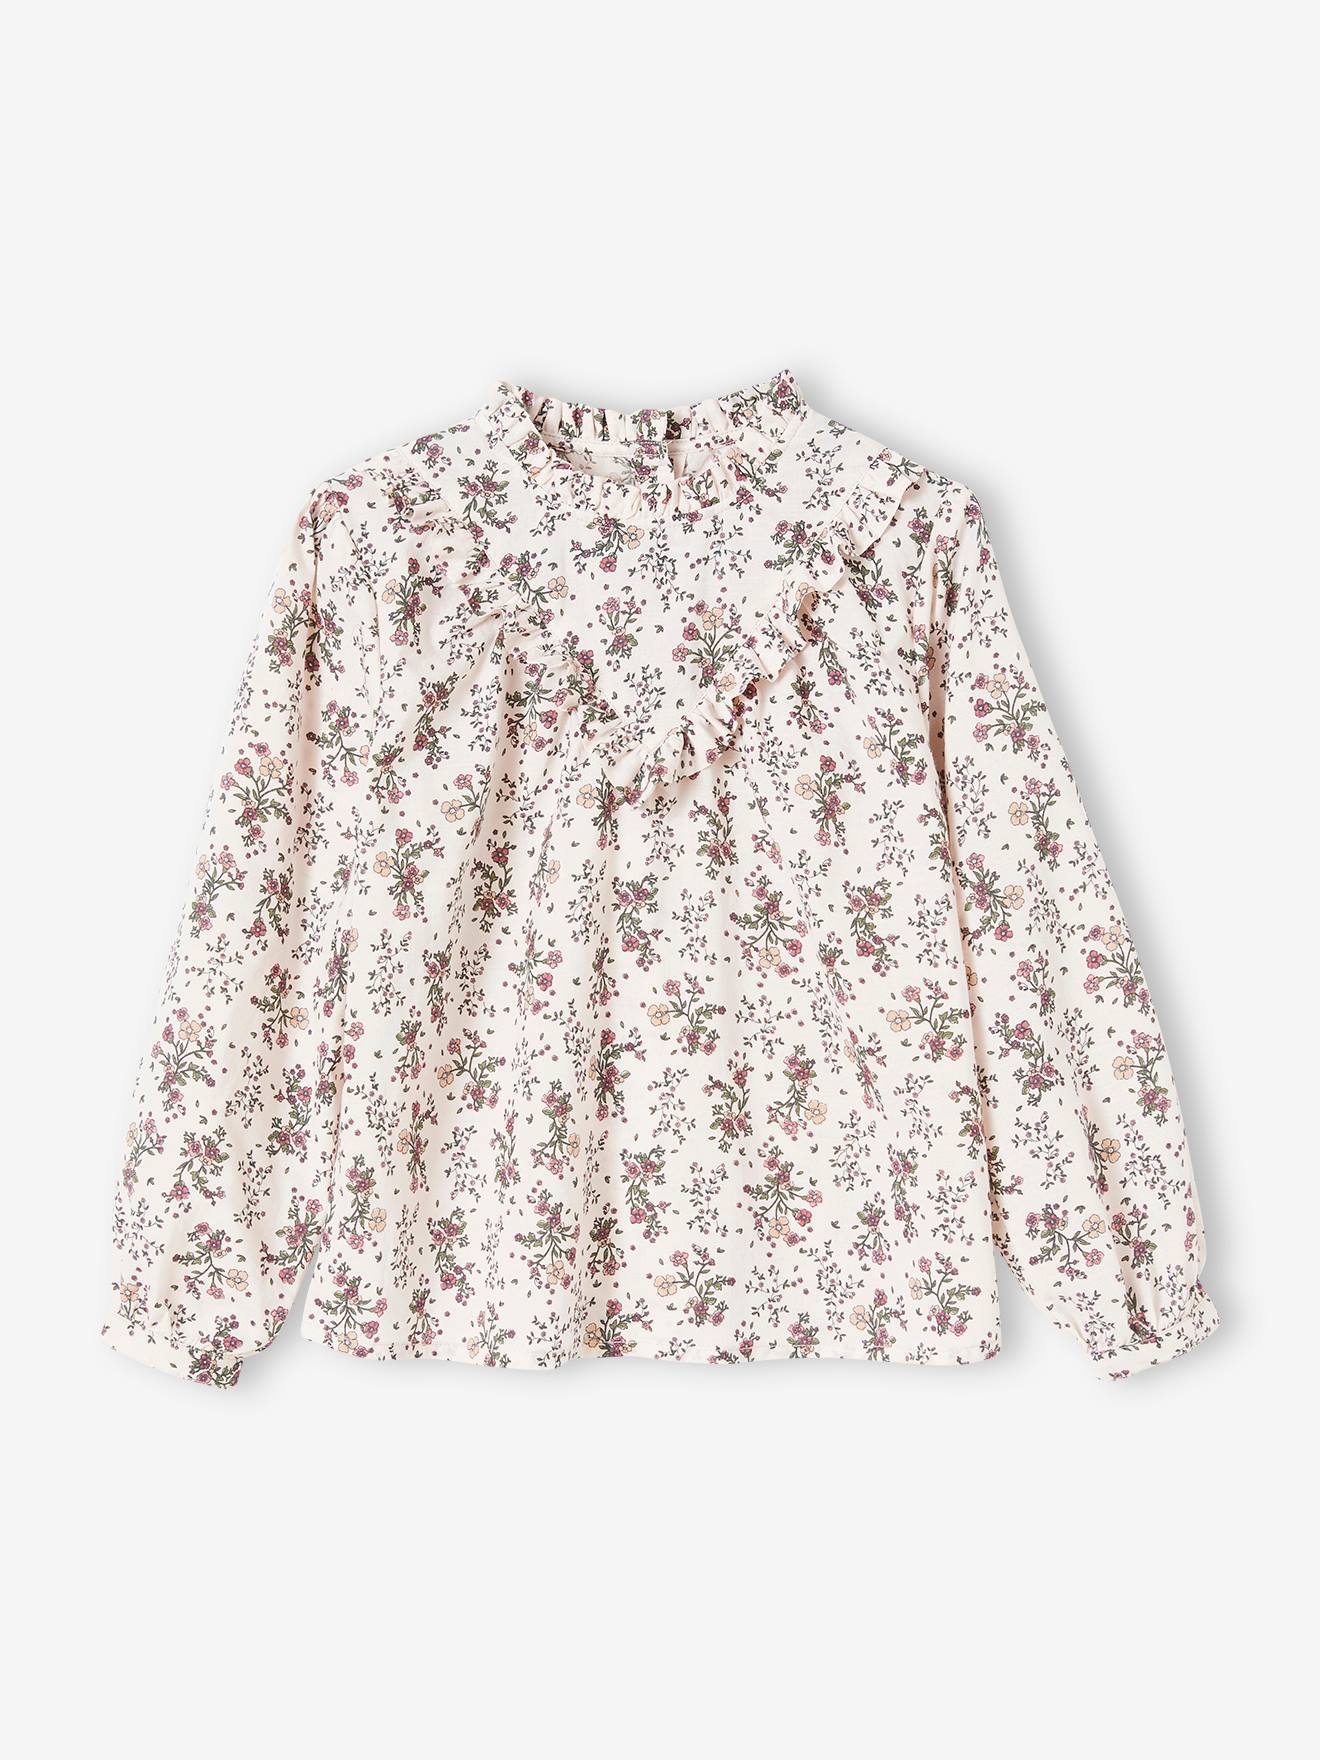 Blouse with Crew Neck & Floral Print for Girls pink light all over printed